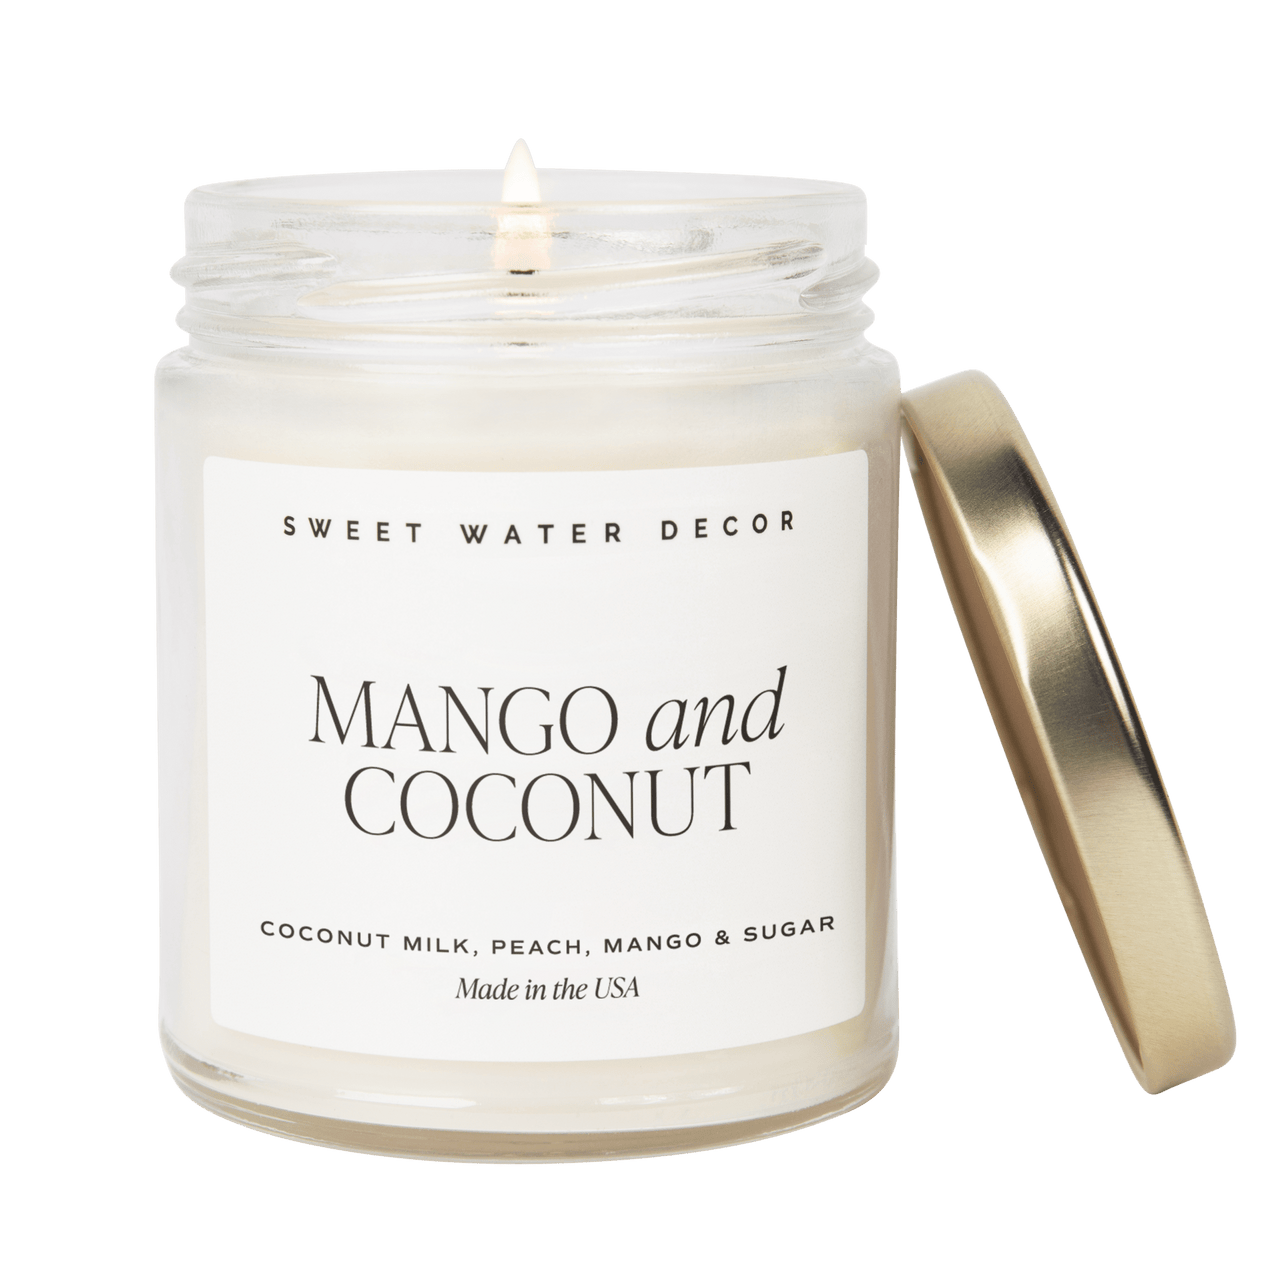 Mango and Coconut Soy Candle - Clear Jar - 9 oz - Tony's Home Furnishings